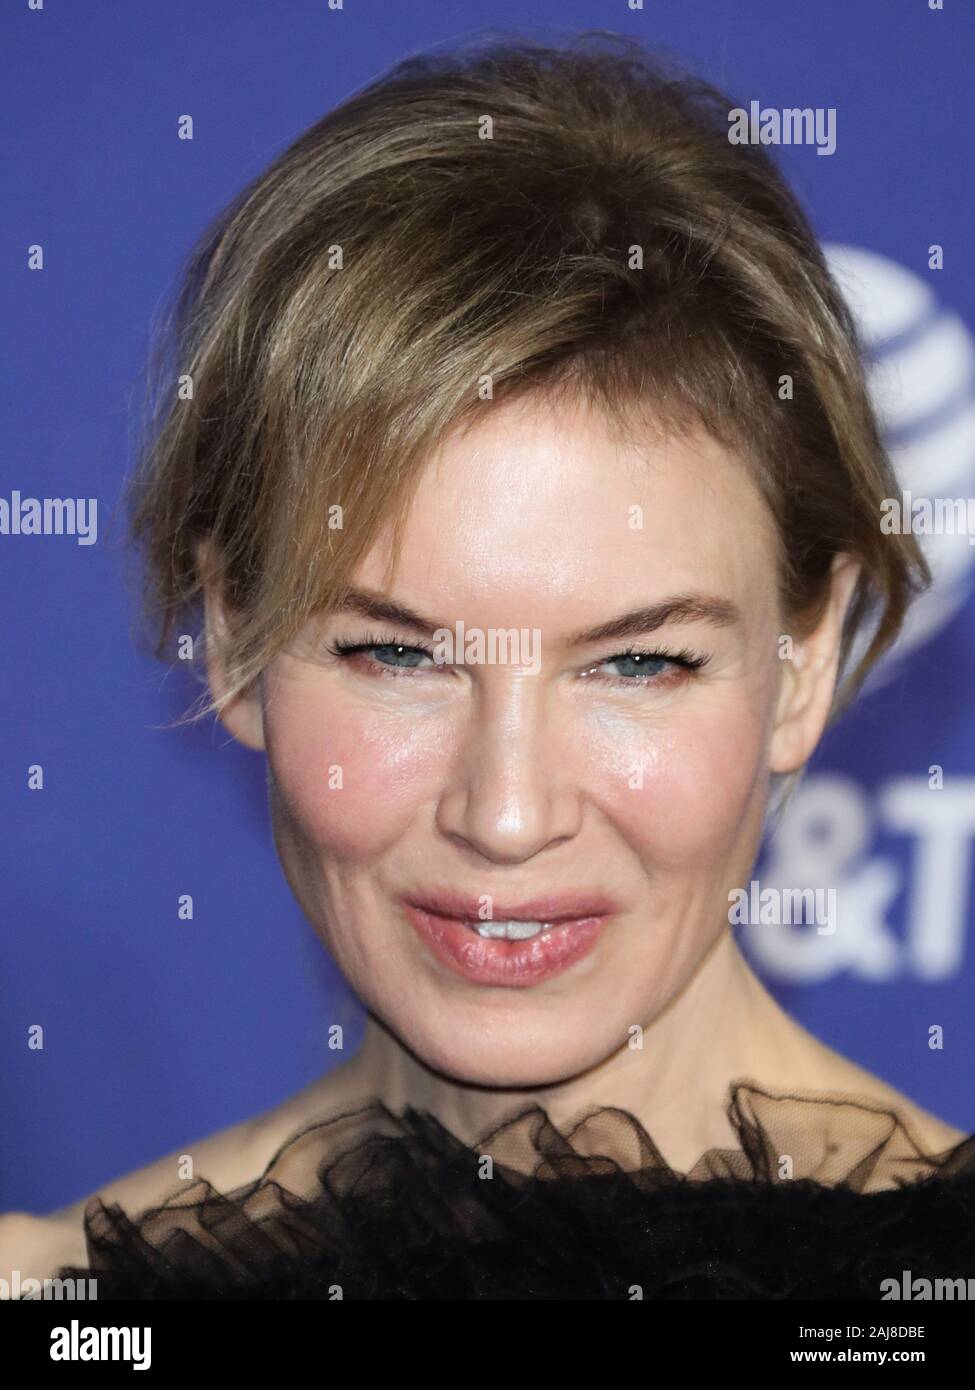 PALM SPRINGS, CALIFORNIA, USA - JANUARY 02: Actress Renee Zellweger wearing Jason Wu Collection arrives at the 31st Annual Palm Springs International Film Festival Awards Gala held at the Palm Springs Convention Center on January 2, 2020 in Palm Springs, California, United States. (Photo by Xavier Collin/Image Press Agency) Stock Photo